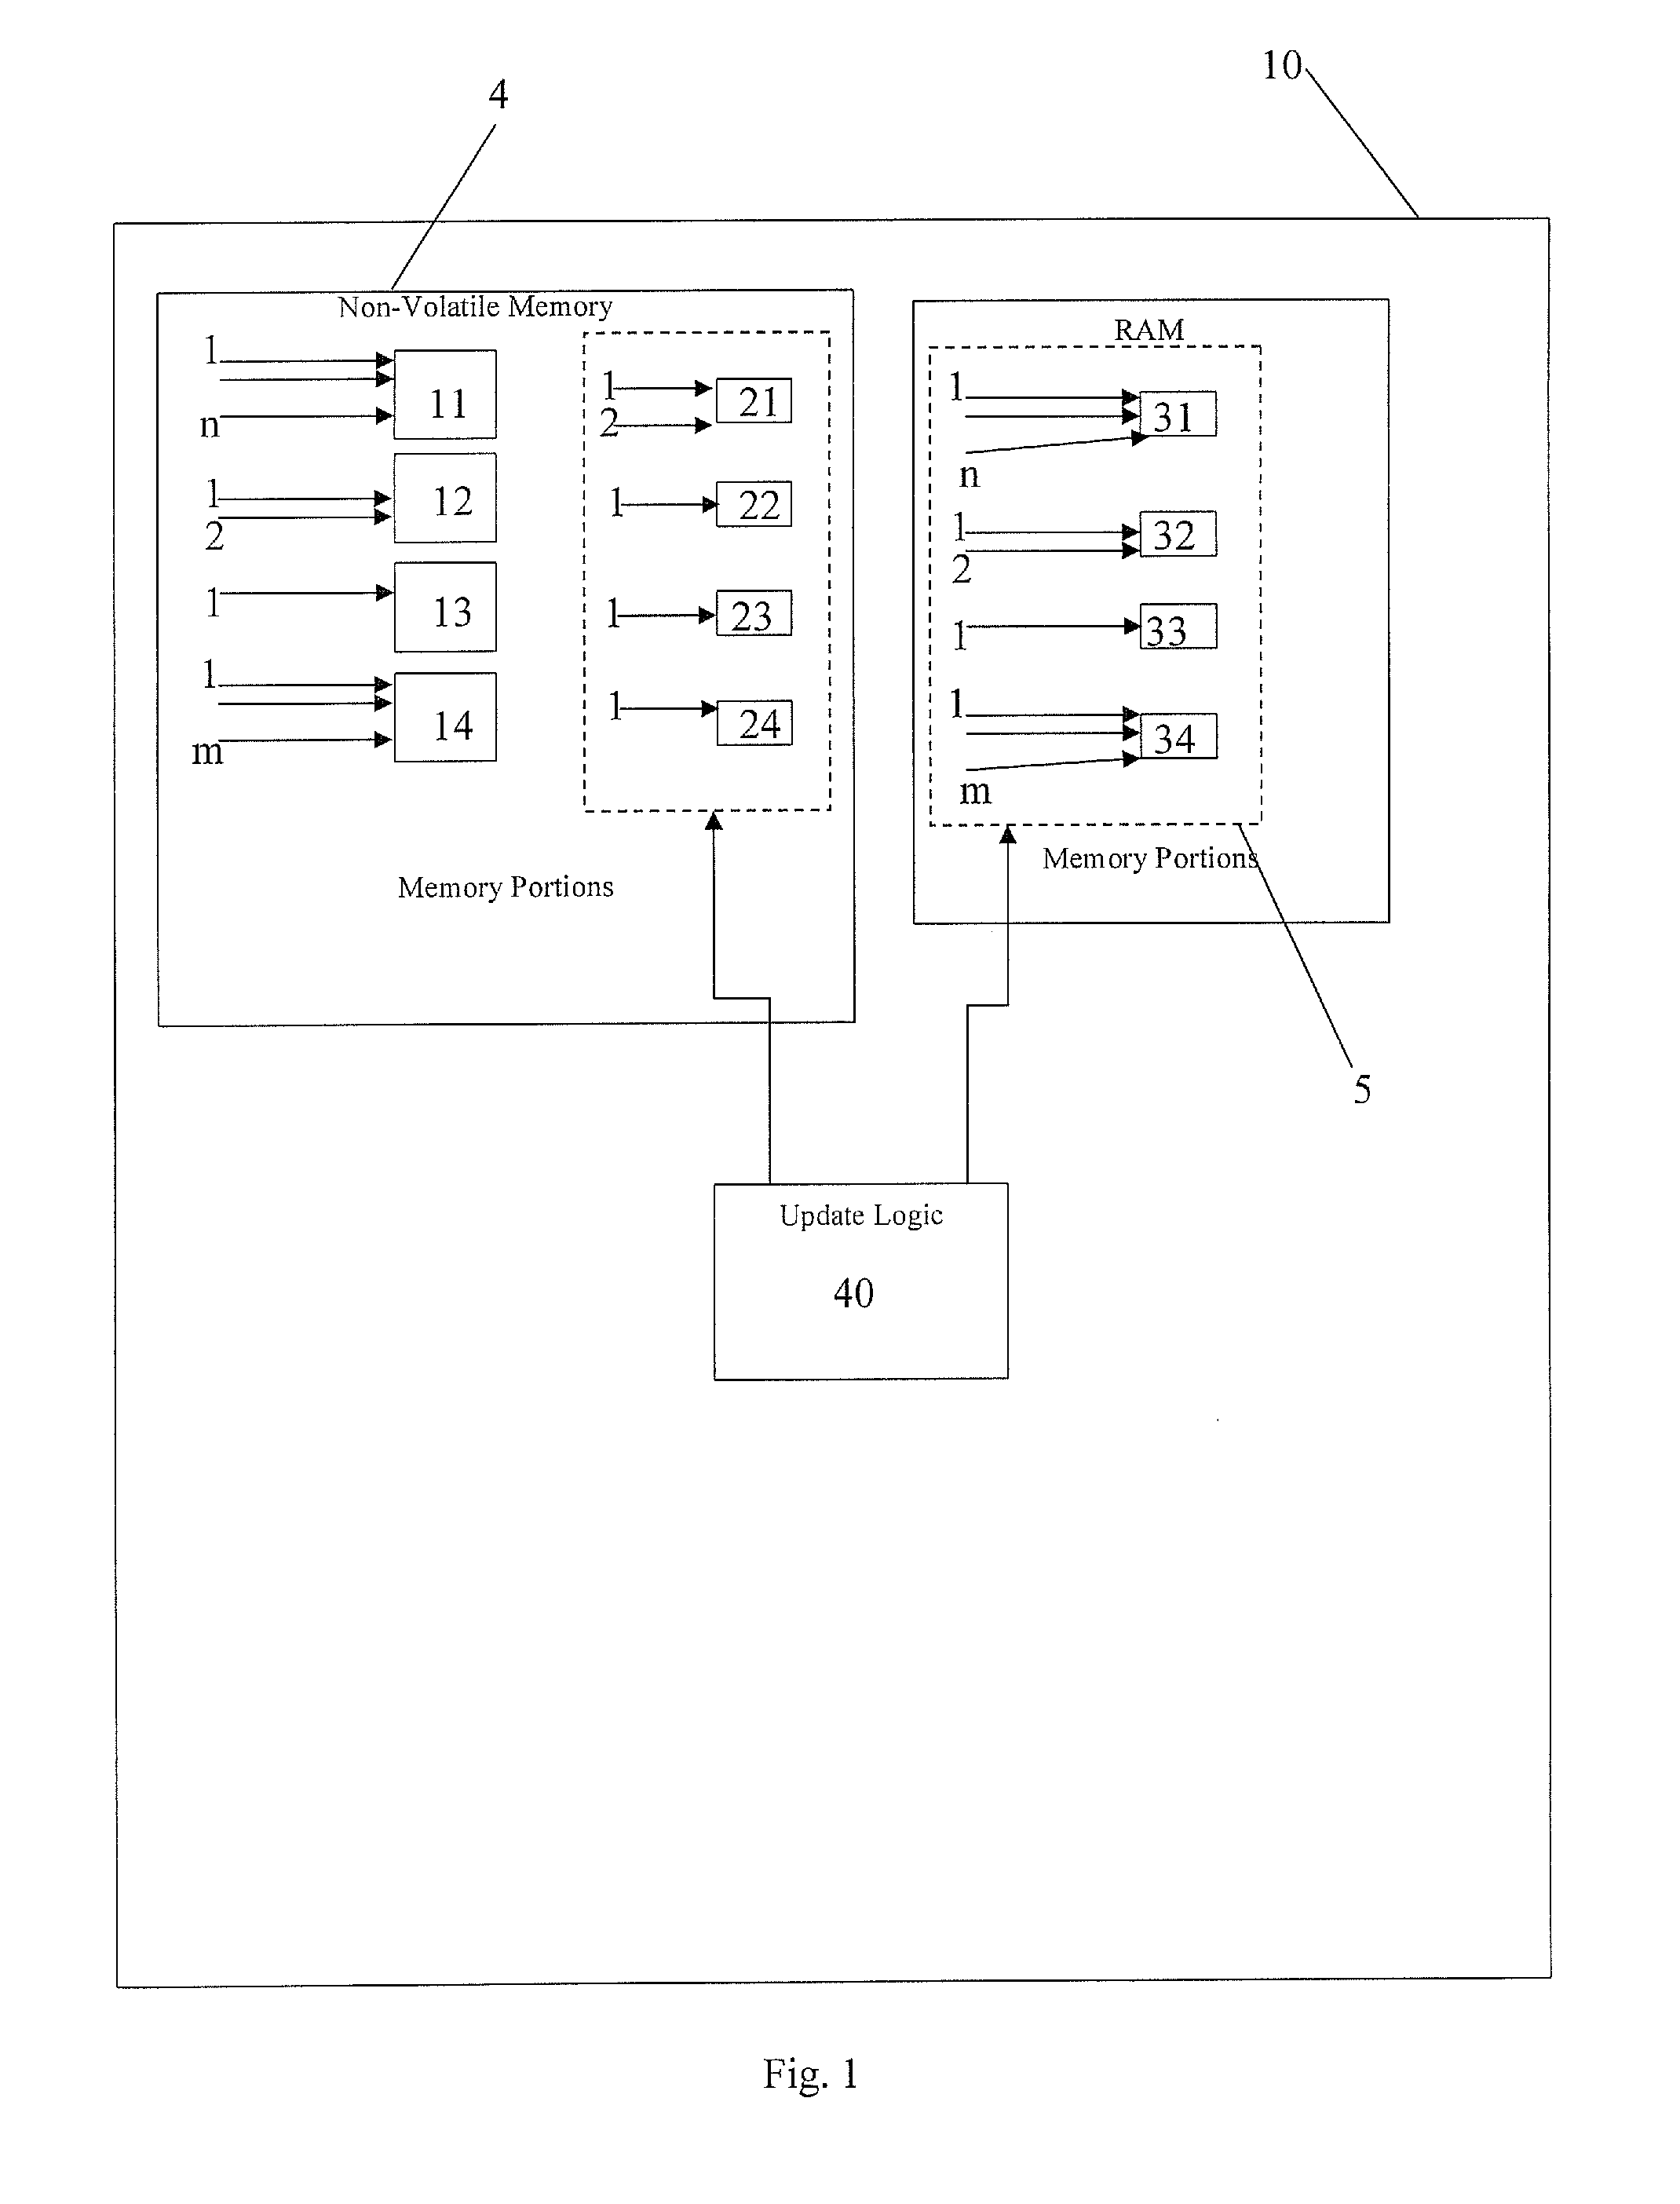 Method and system for improving a control of a limit on writing cycles of an IC card